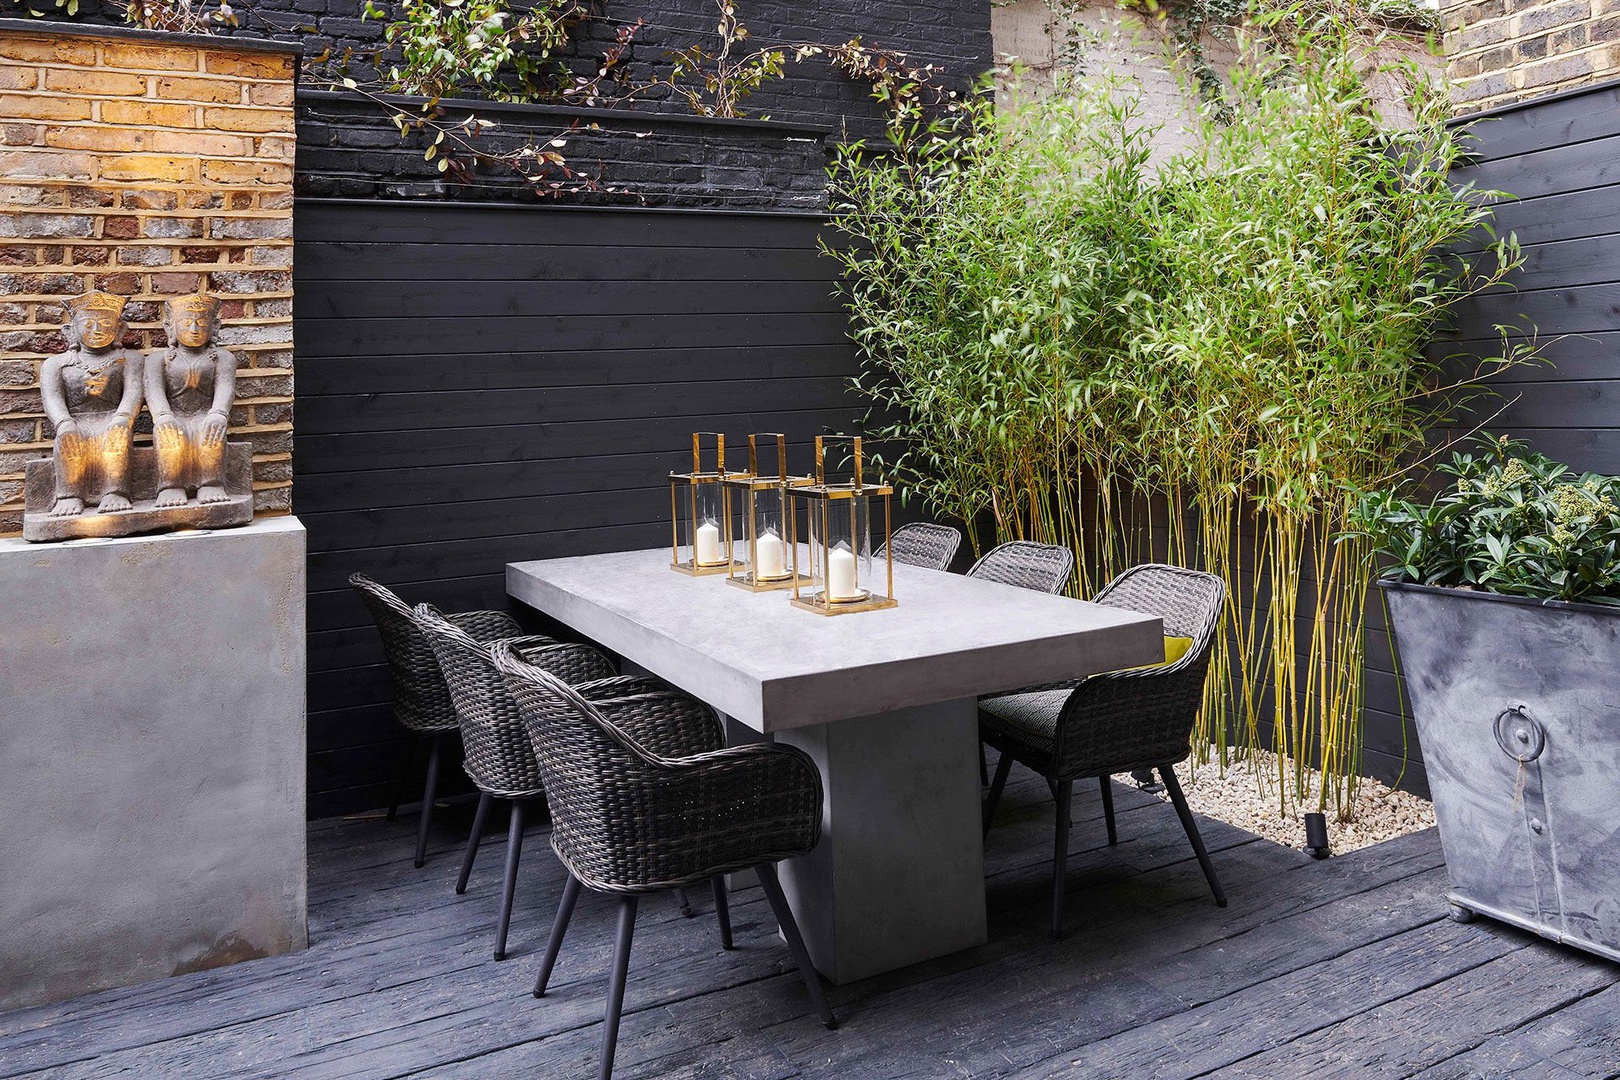 In the summer, enjoy warm London evenings at the patio table